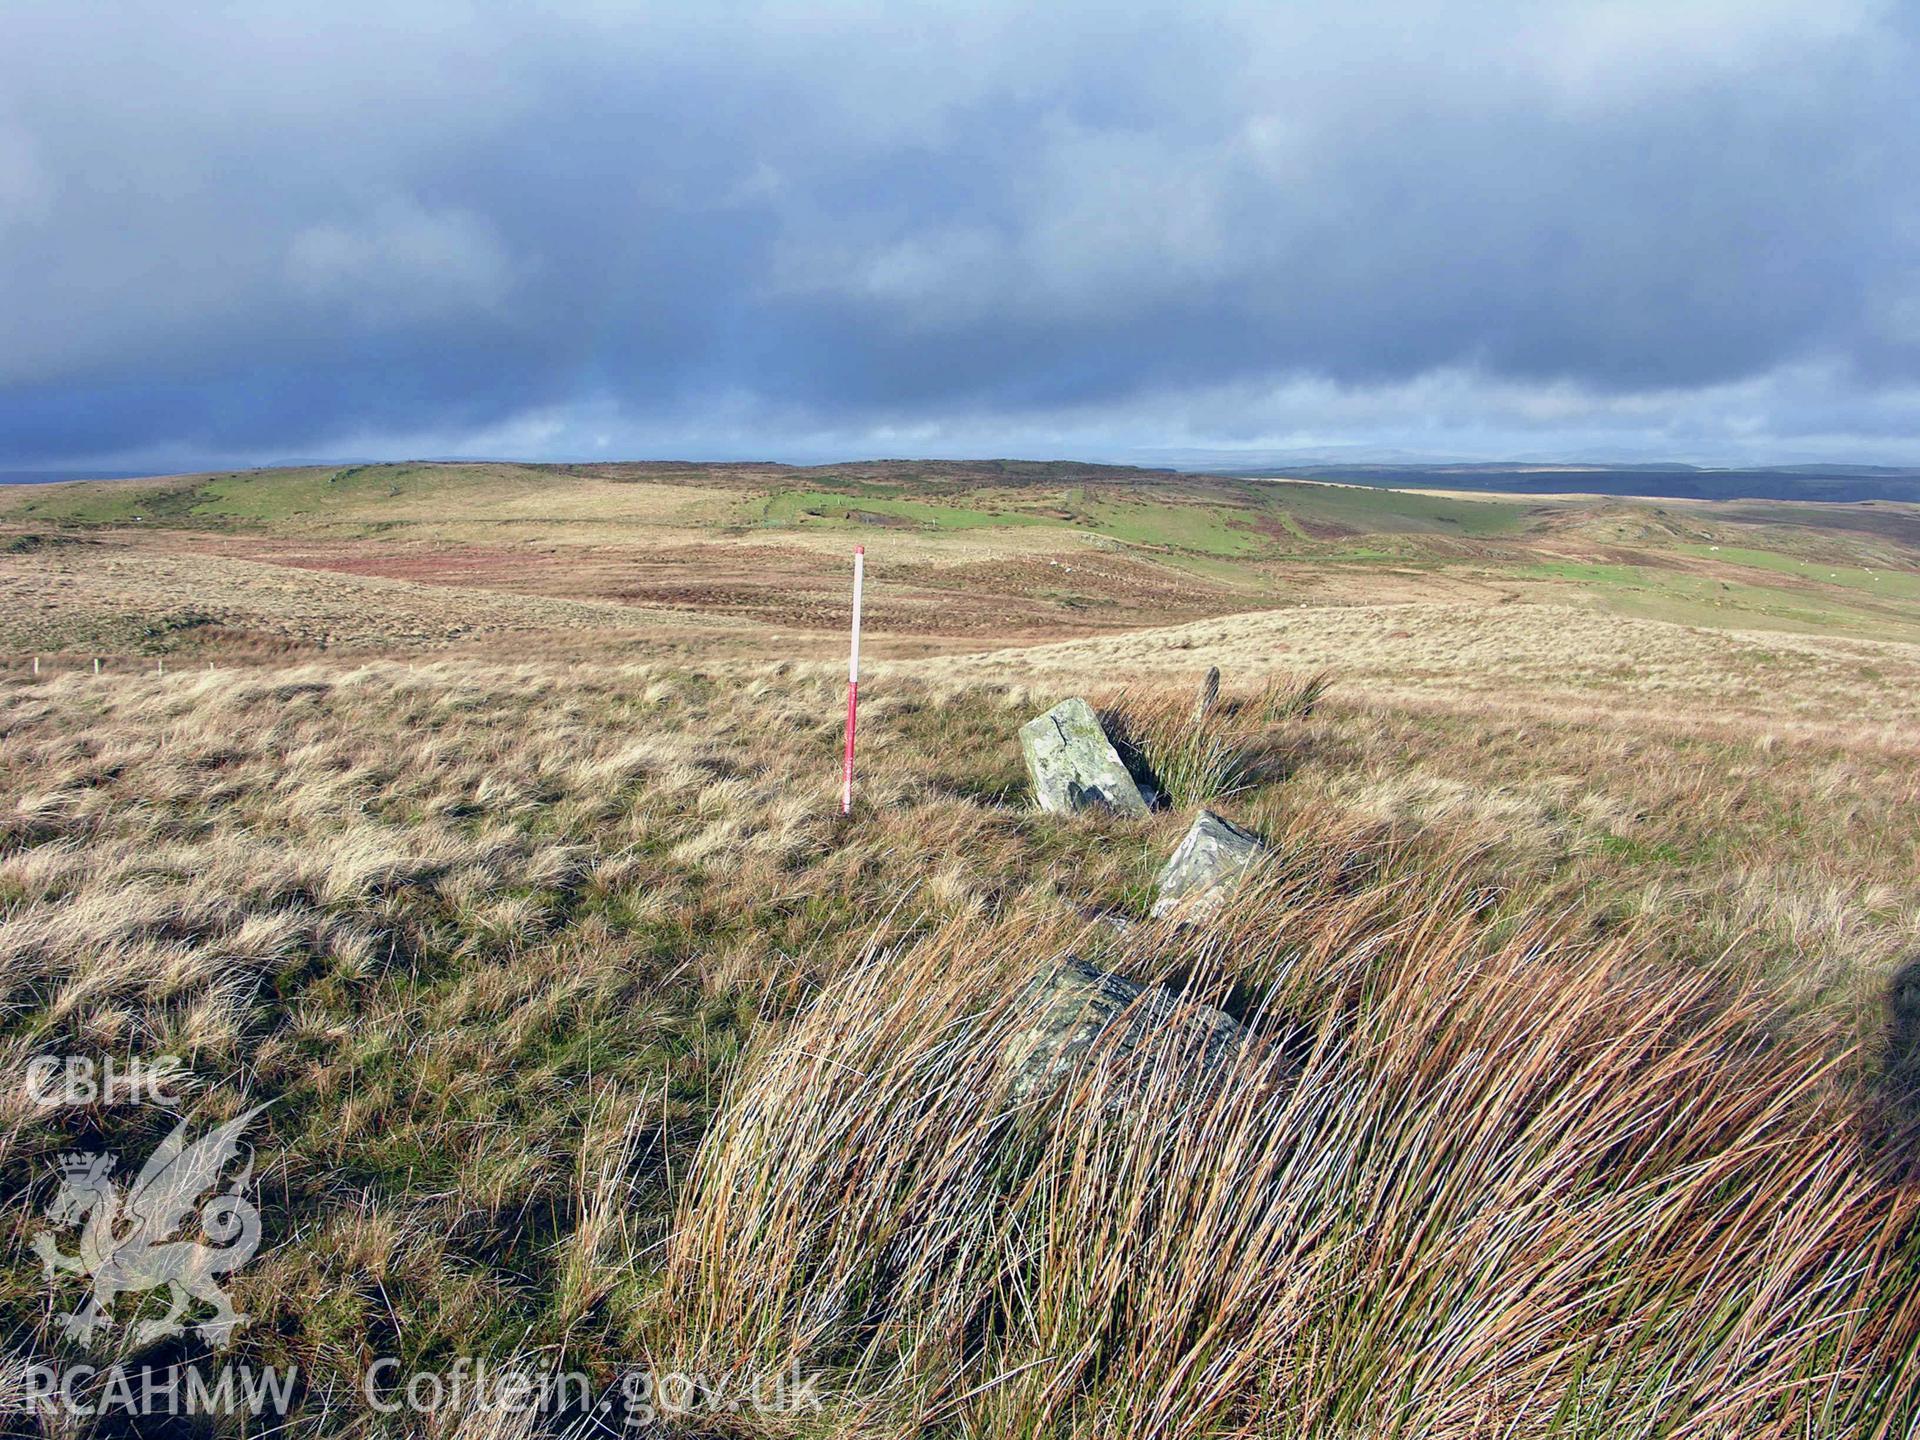 Colour digital photograph showing view along Mg 276, Lluest Uchaf Stone Row - part of archaeological desk based assessment for Esgair Cwmowen, Carno (CAP Report 549).